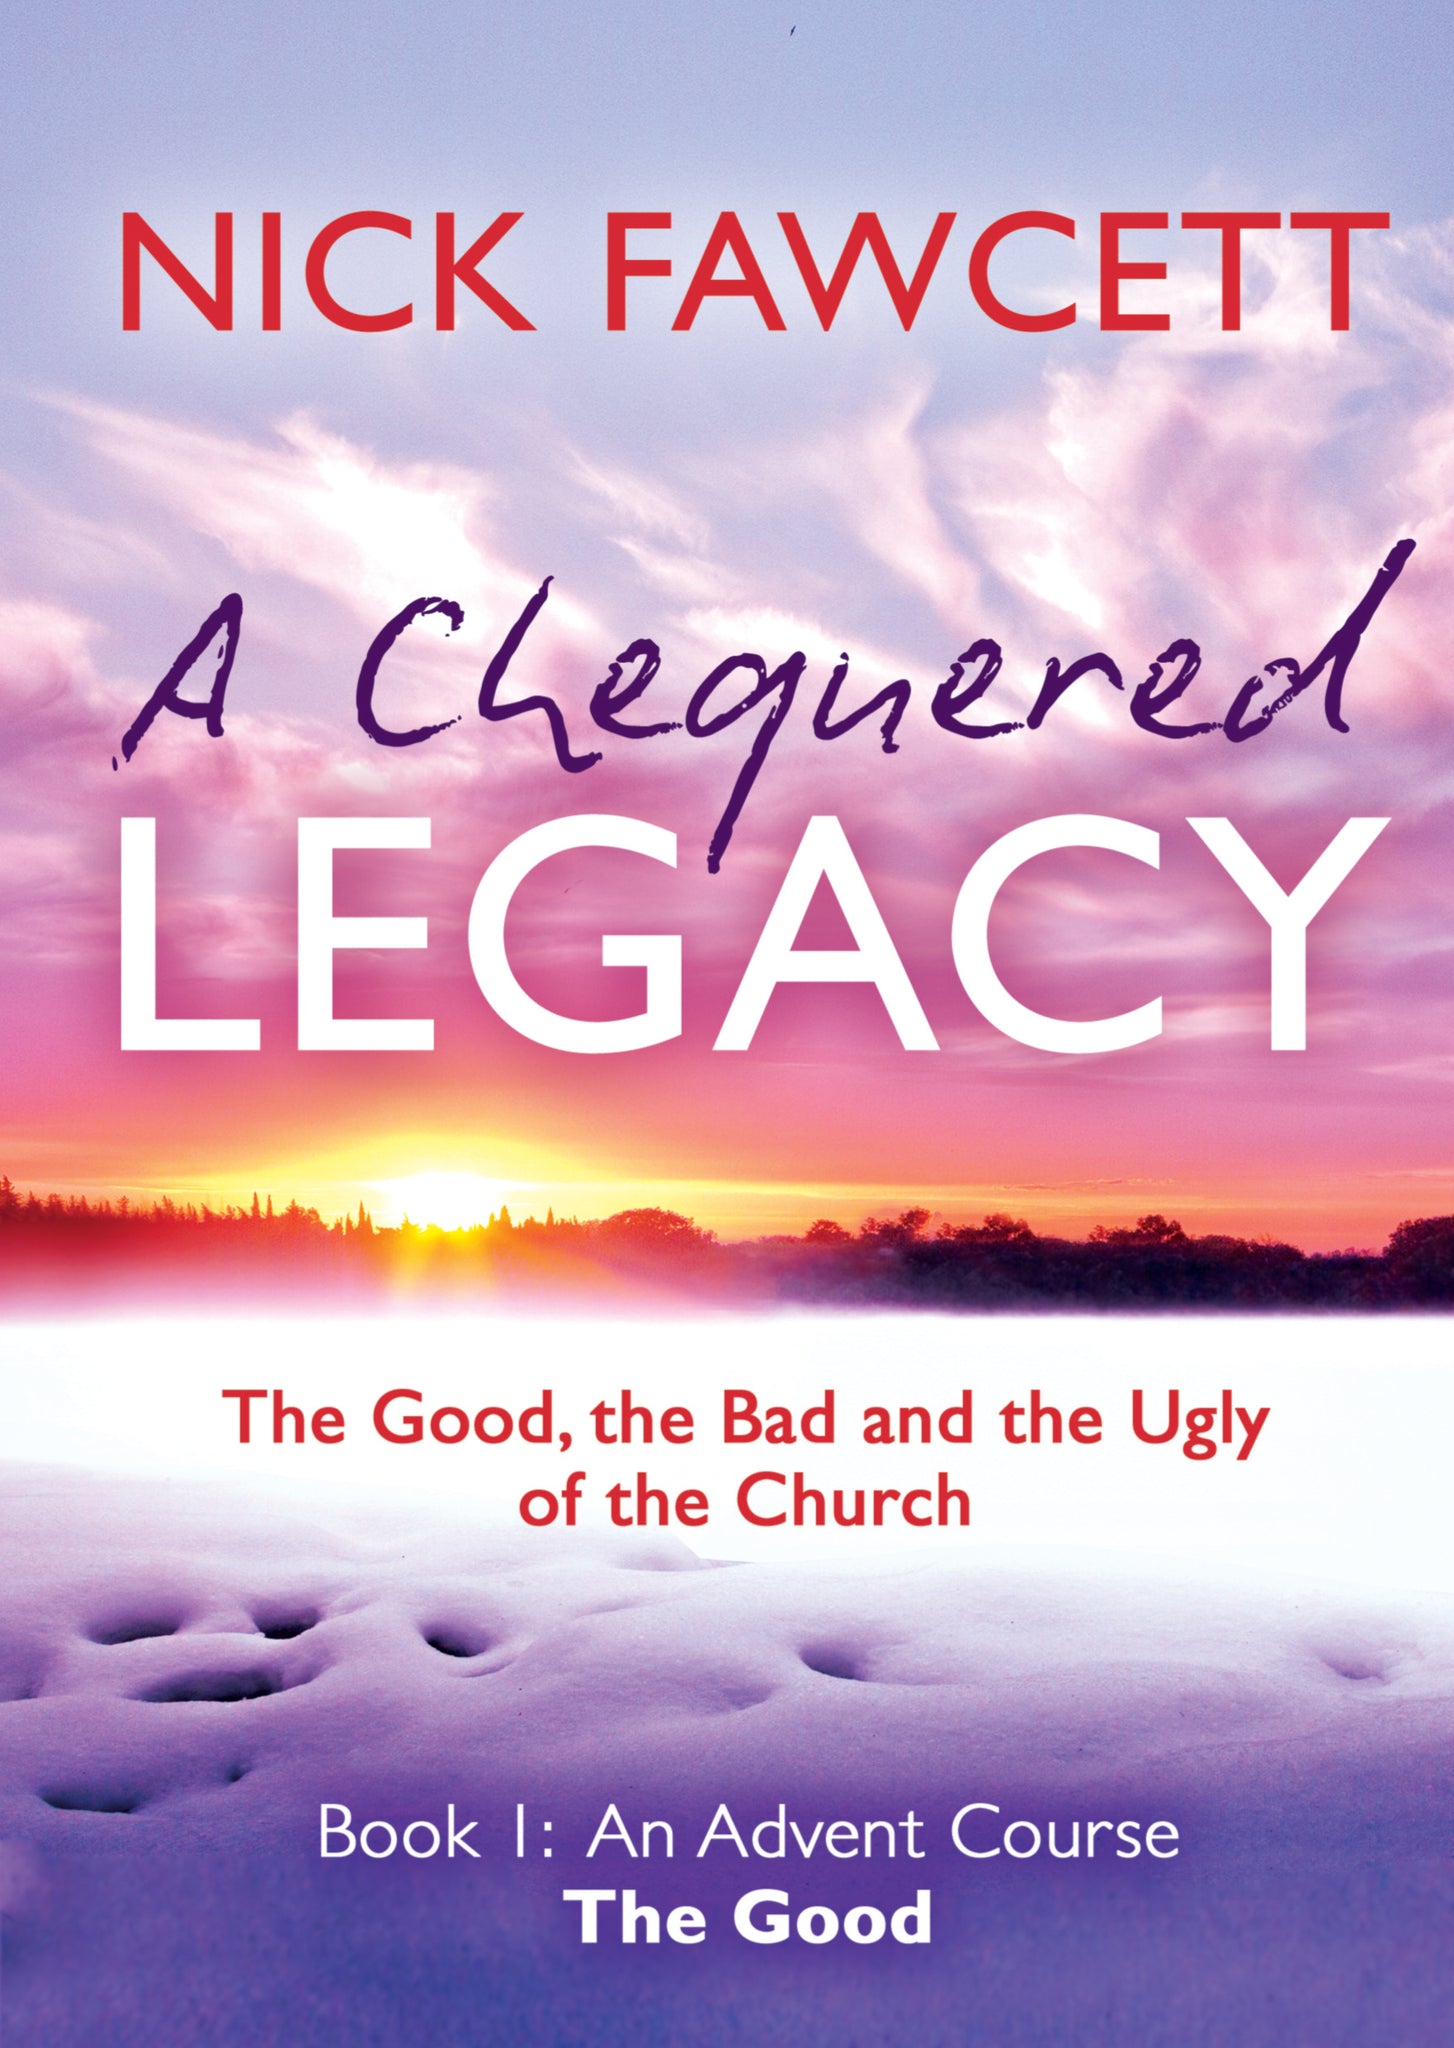 A Chequered Legacy Book 1: An Advent Course (The Good)A Chequered Legacy Book 1: An Advent Course (The Good)